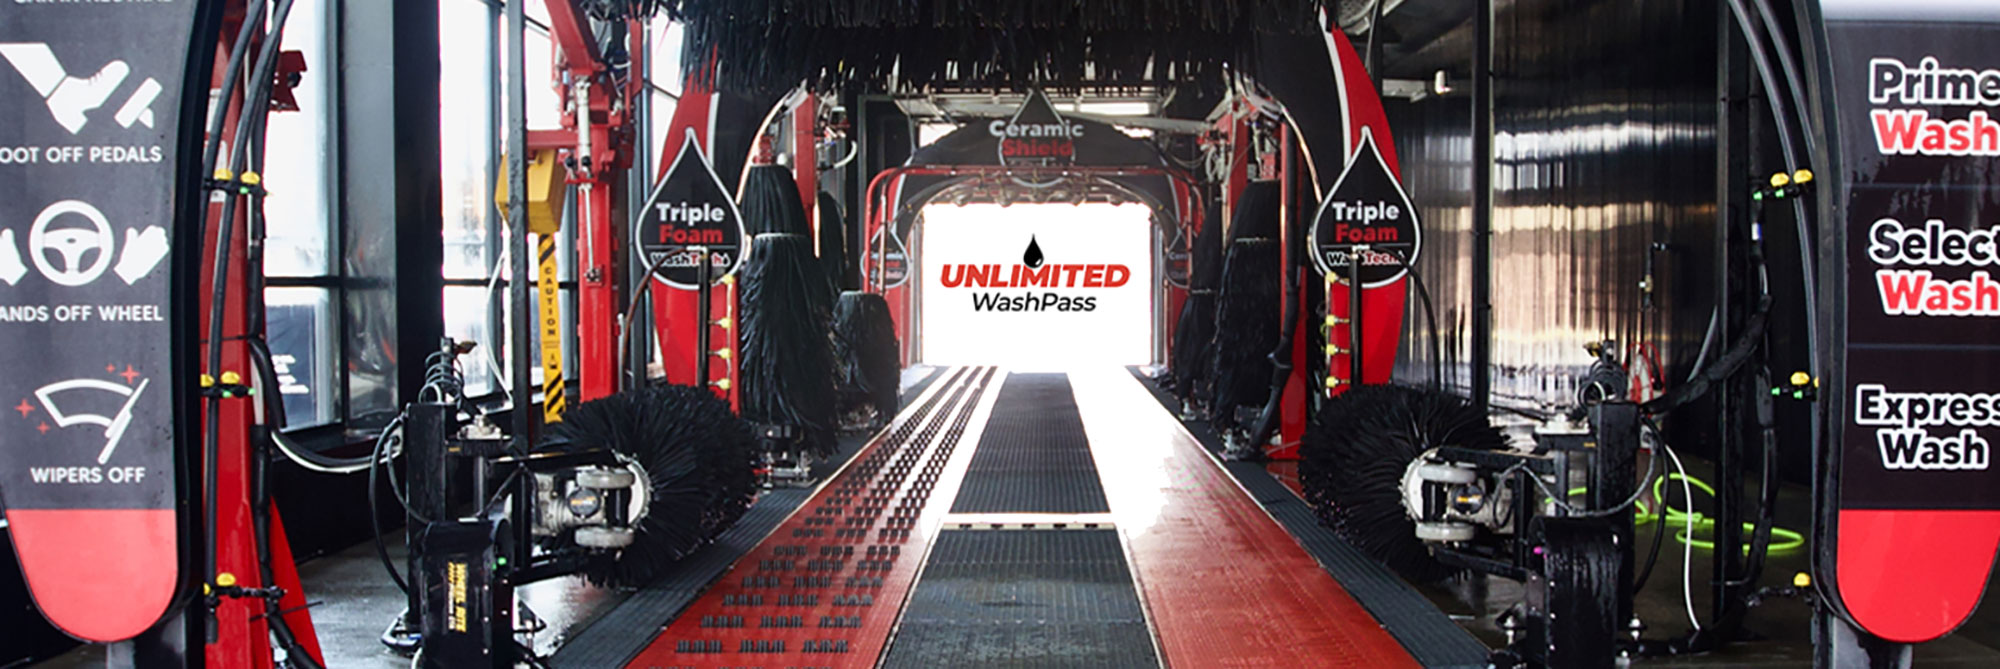 Unlimited Washes